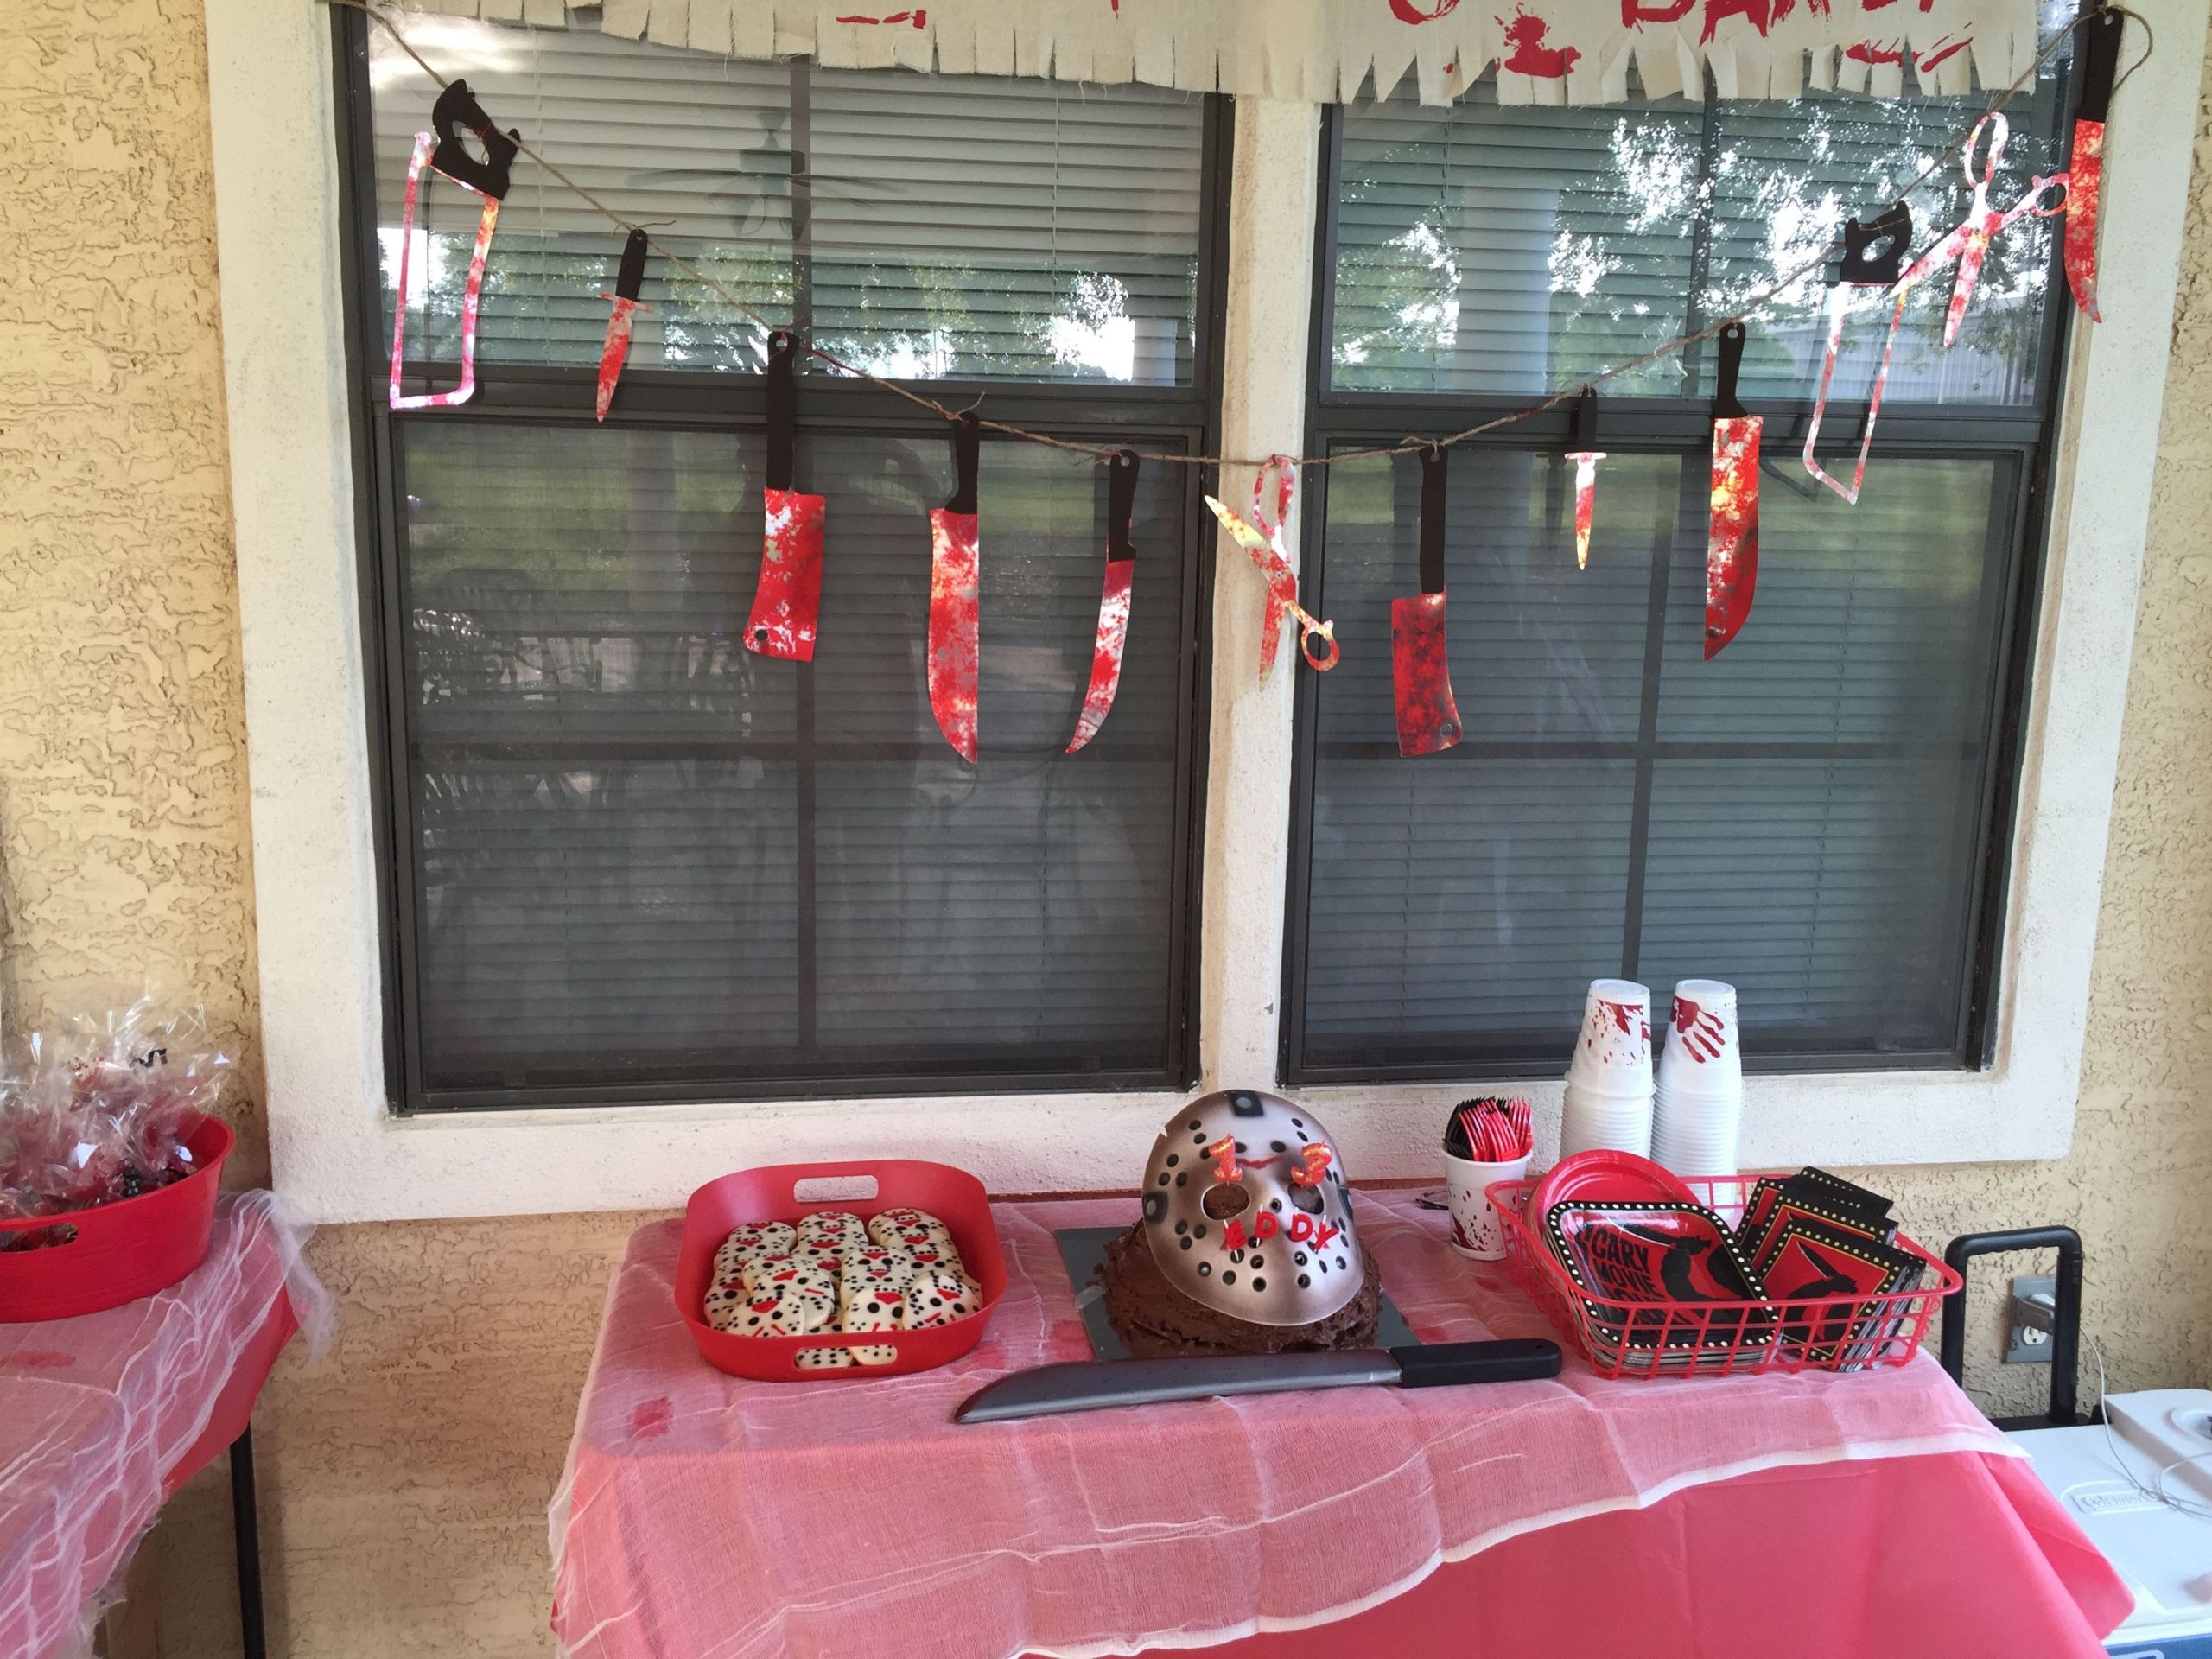 Good 13Th Birthday Party Ideas
 Decorations for the Friday the 13th birthday party Not